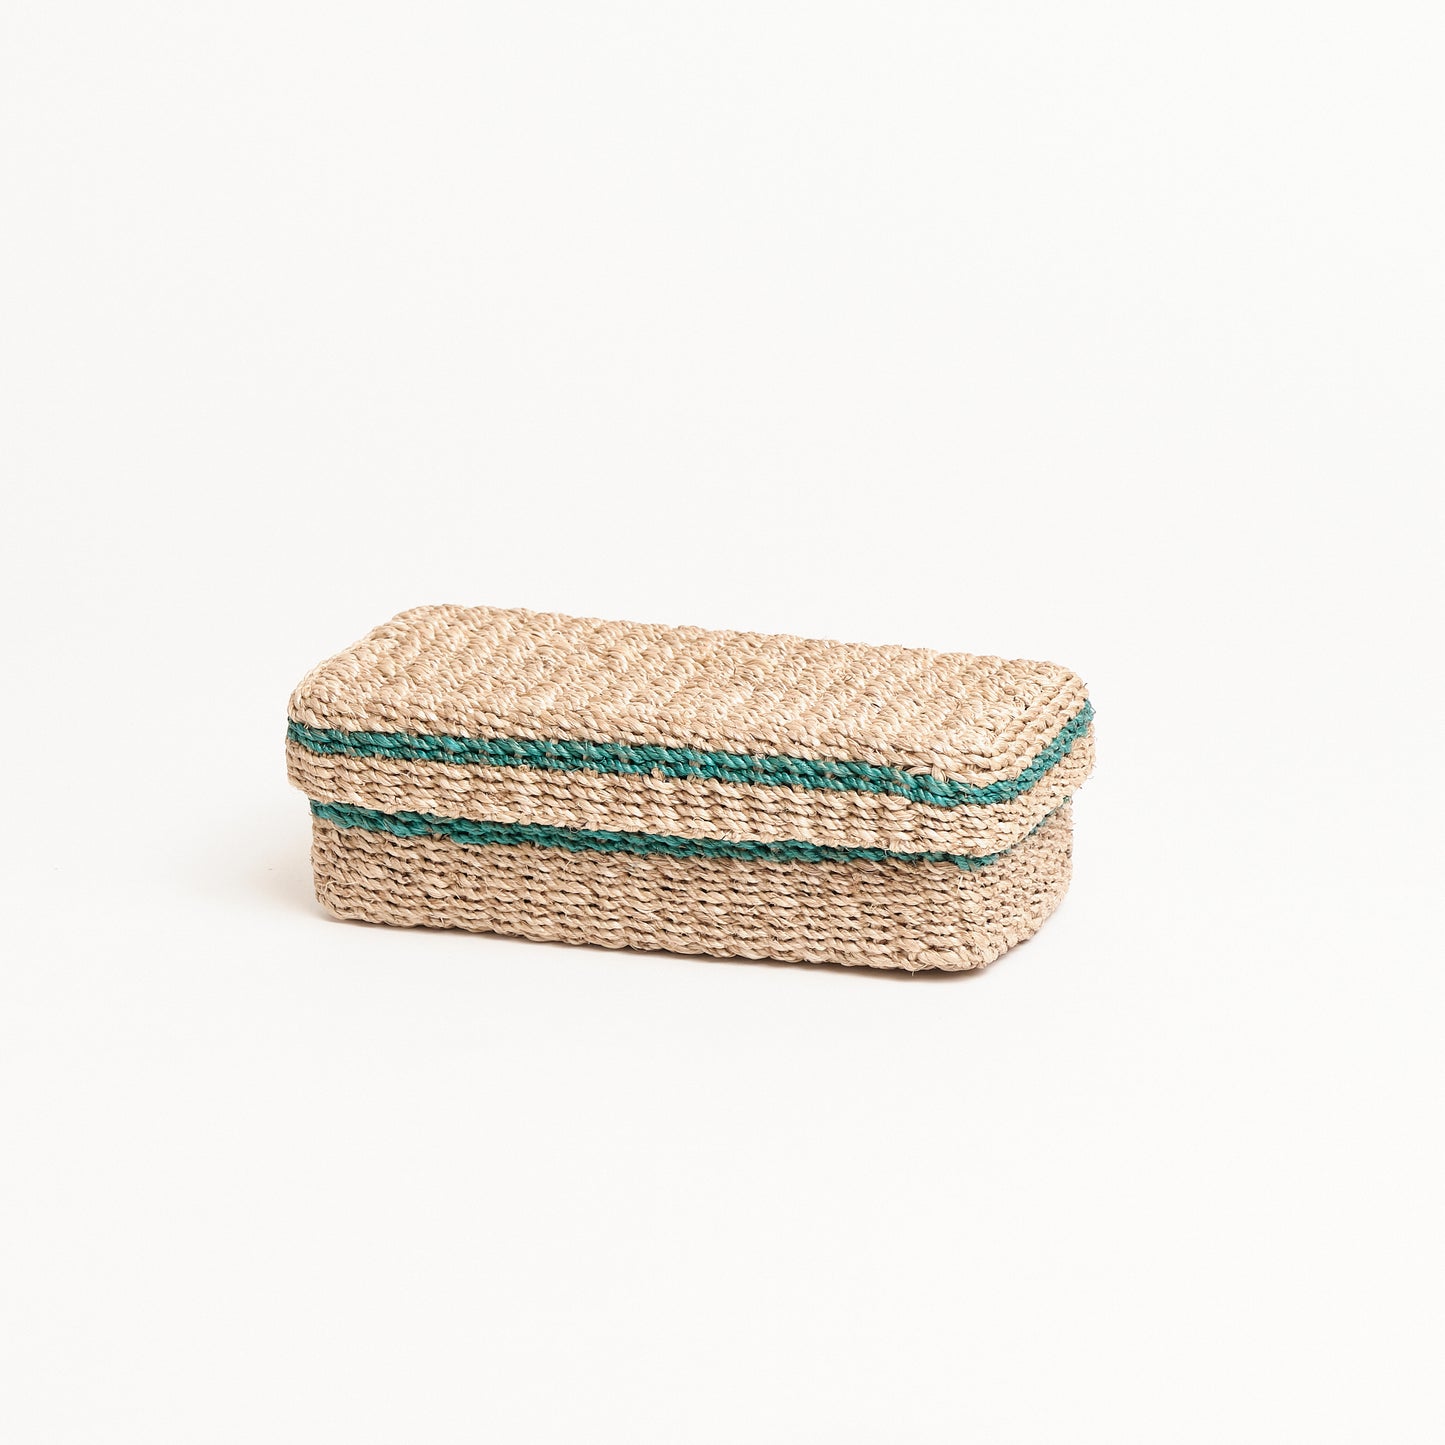 Abaca Twine Utensil Organizer With Cover (Green Stripes)